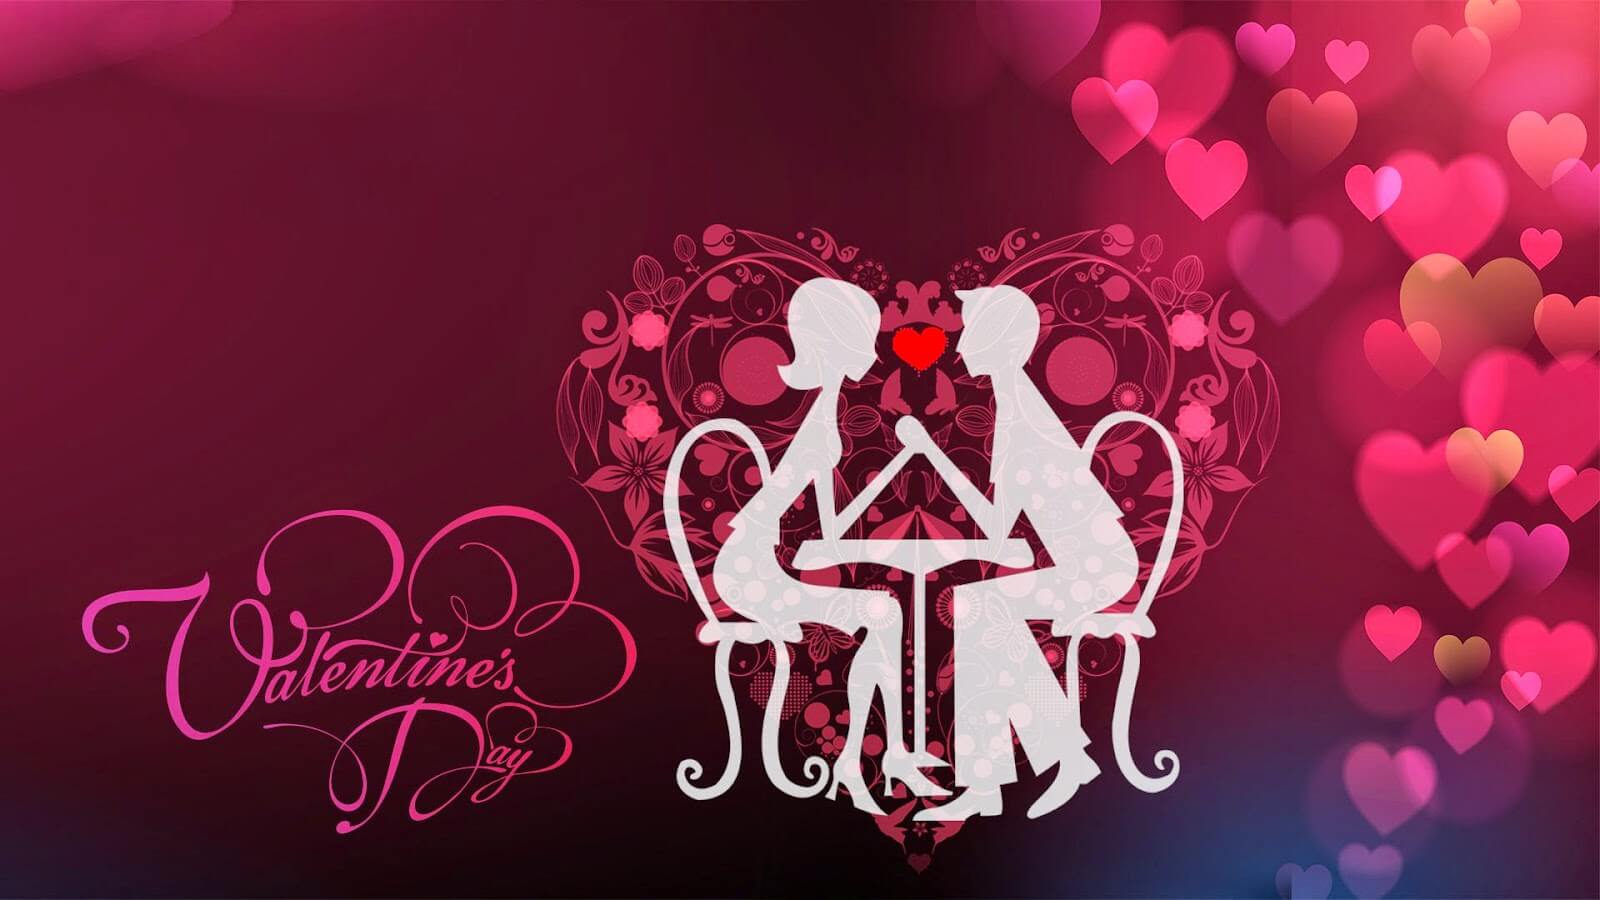 Happy Valentines day Love Couple Image Wallpapers